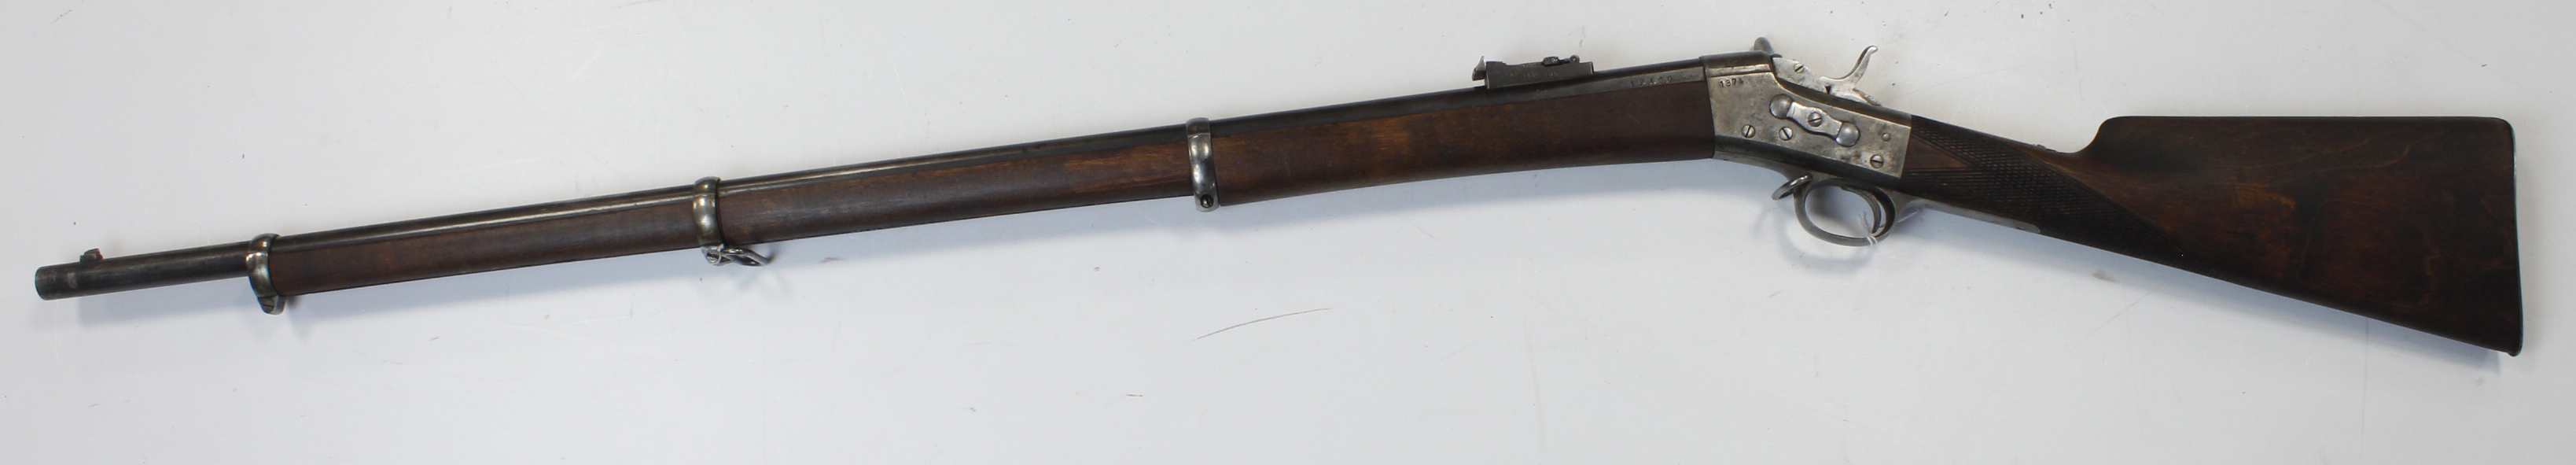 Swedish Conrtract Rolling Block Rifle, missing ram rod, Obsolete Calibre, no licence required